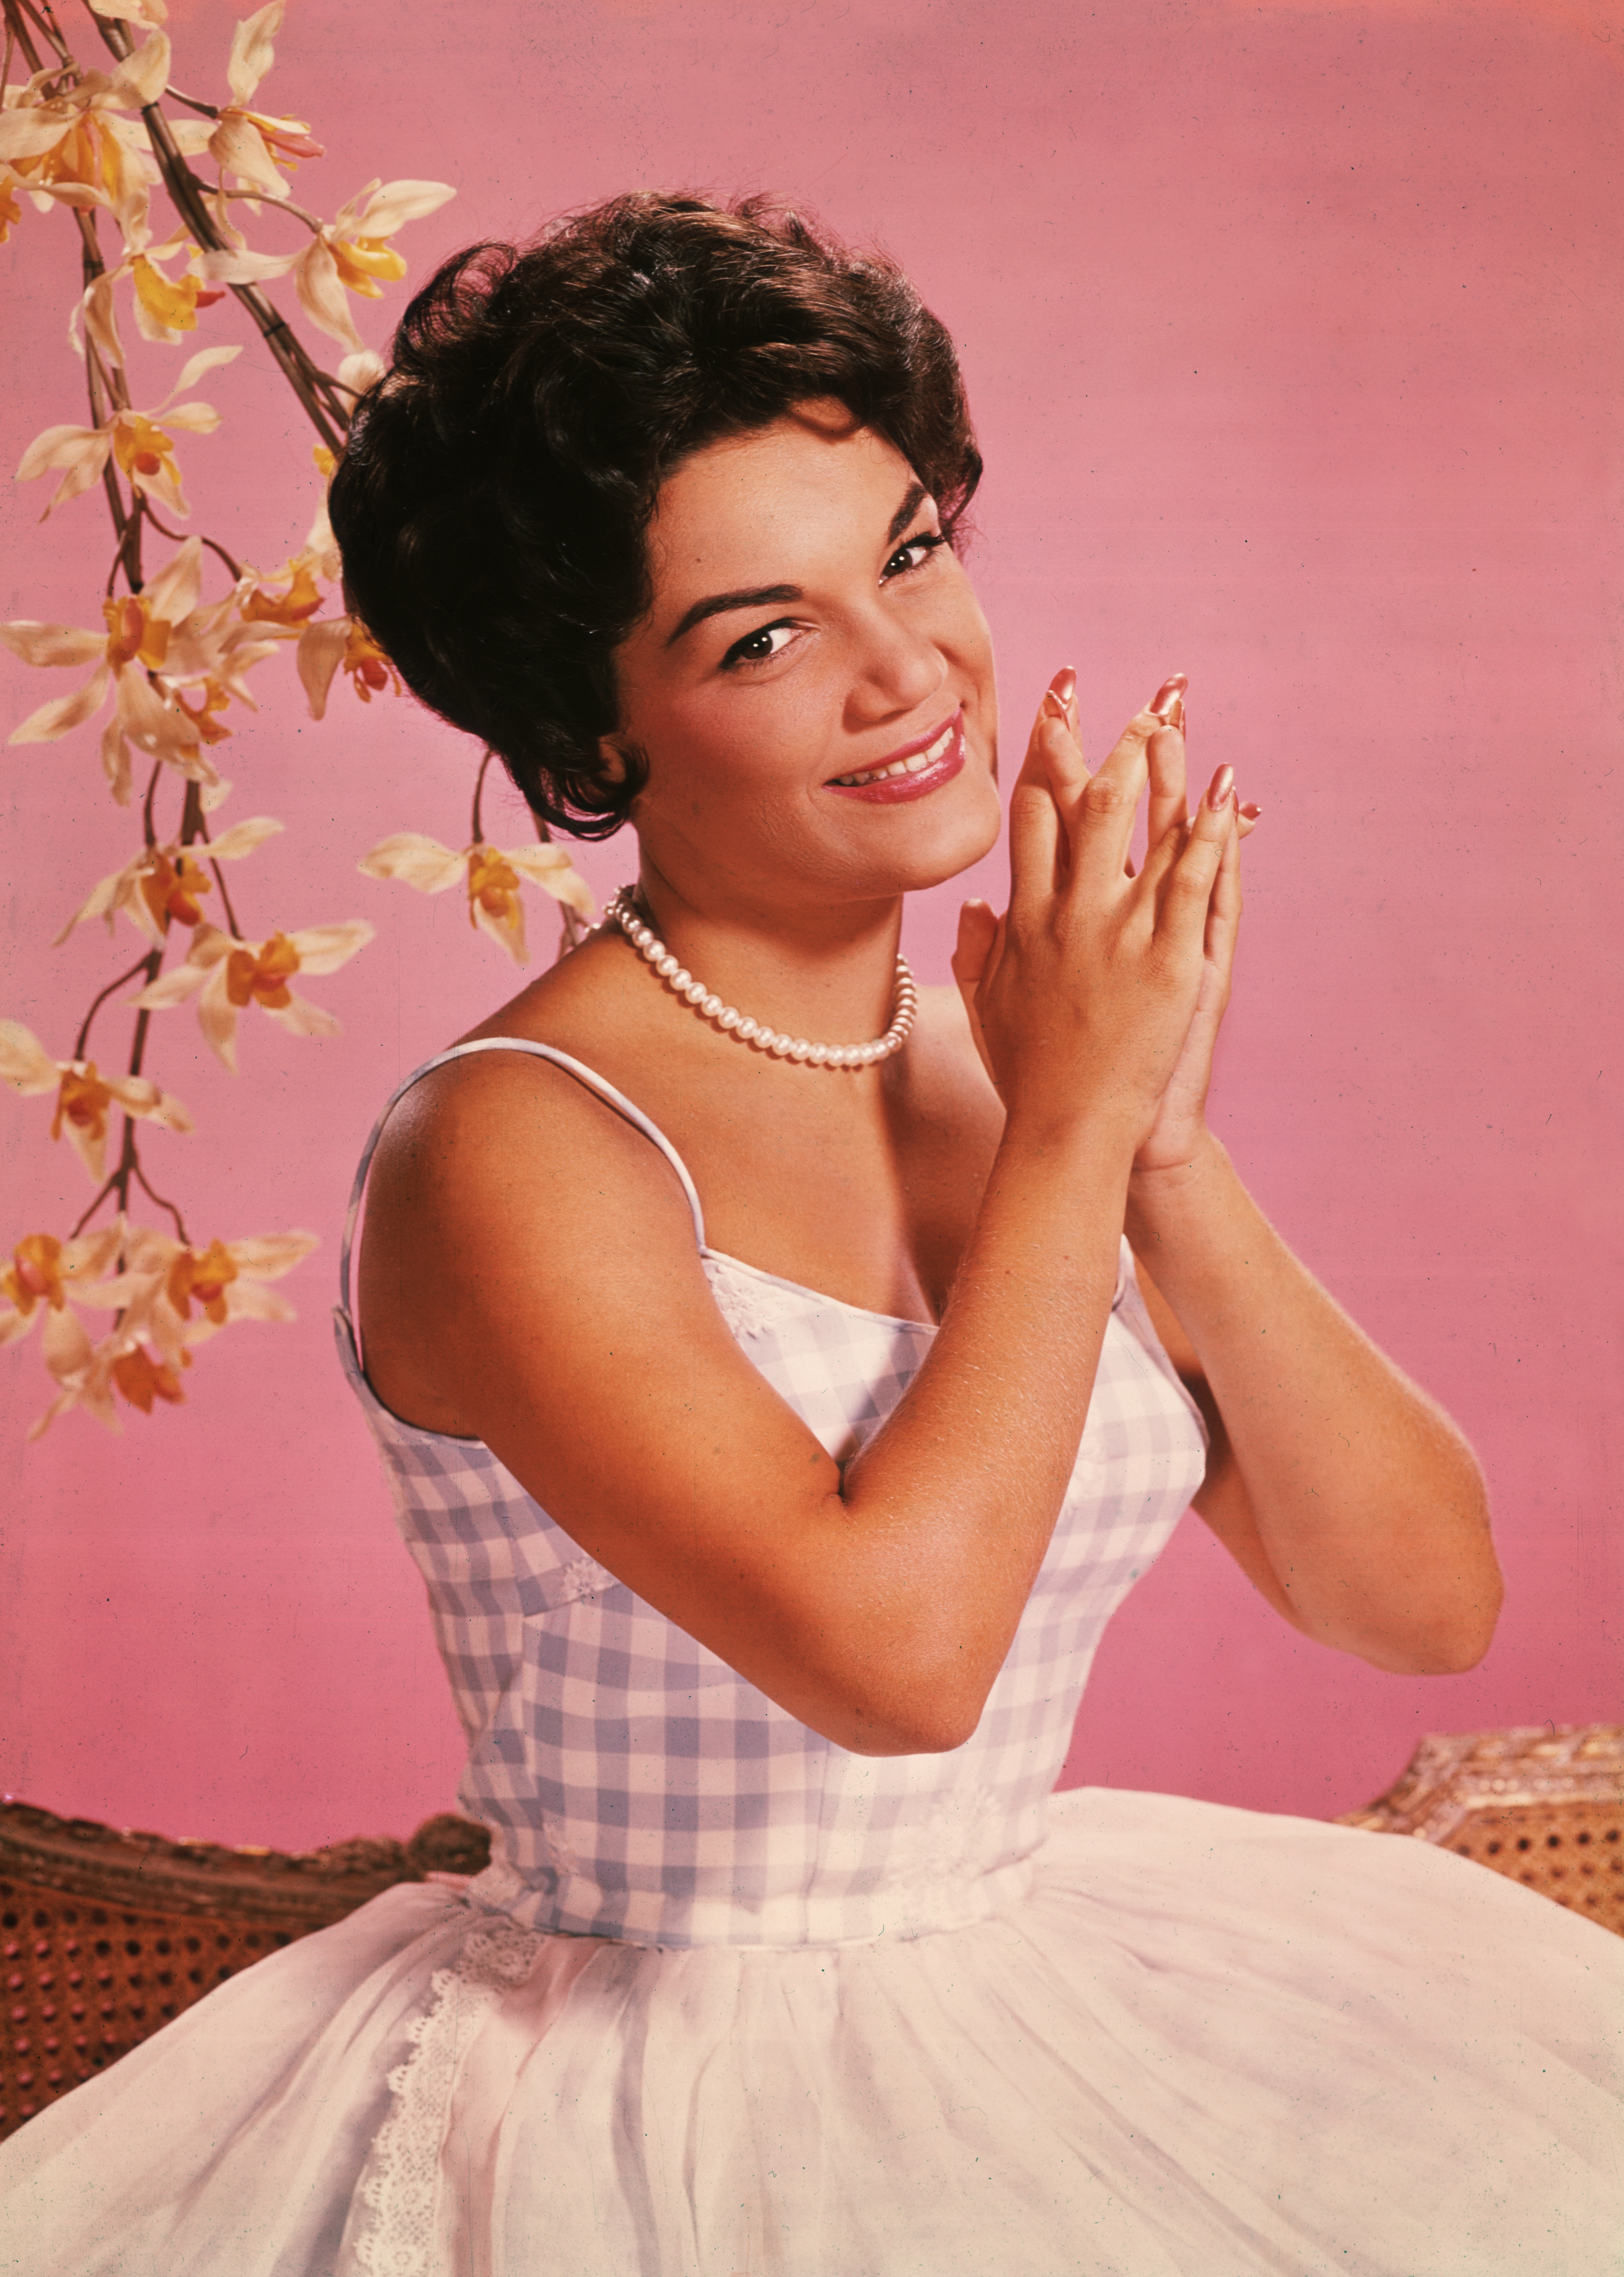 Connie Francis posing in a studio portrait, circa 1960 | Source: Getty Images